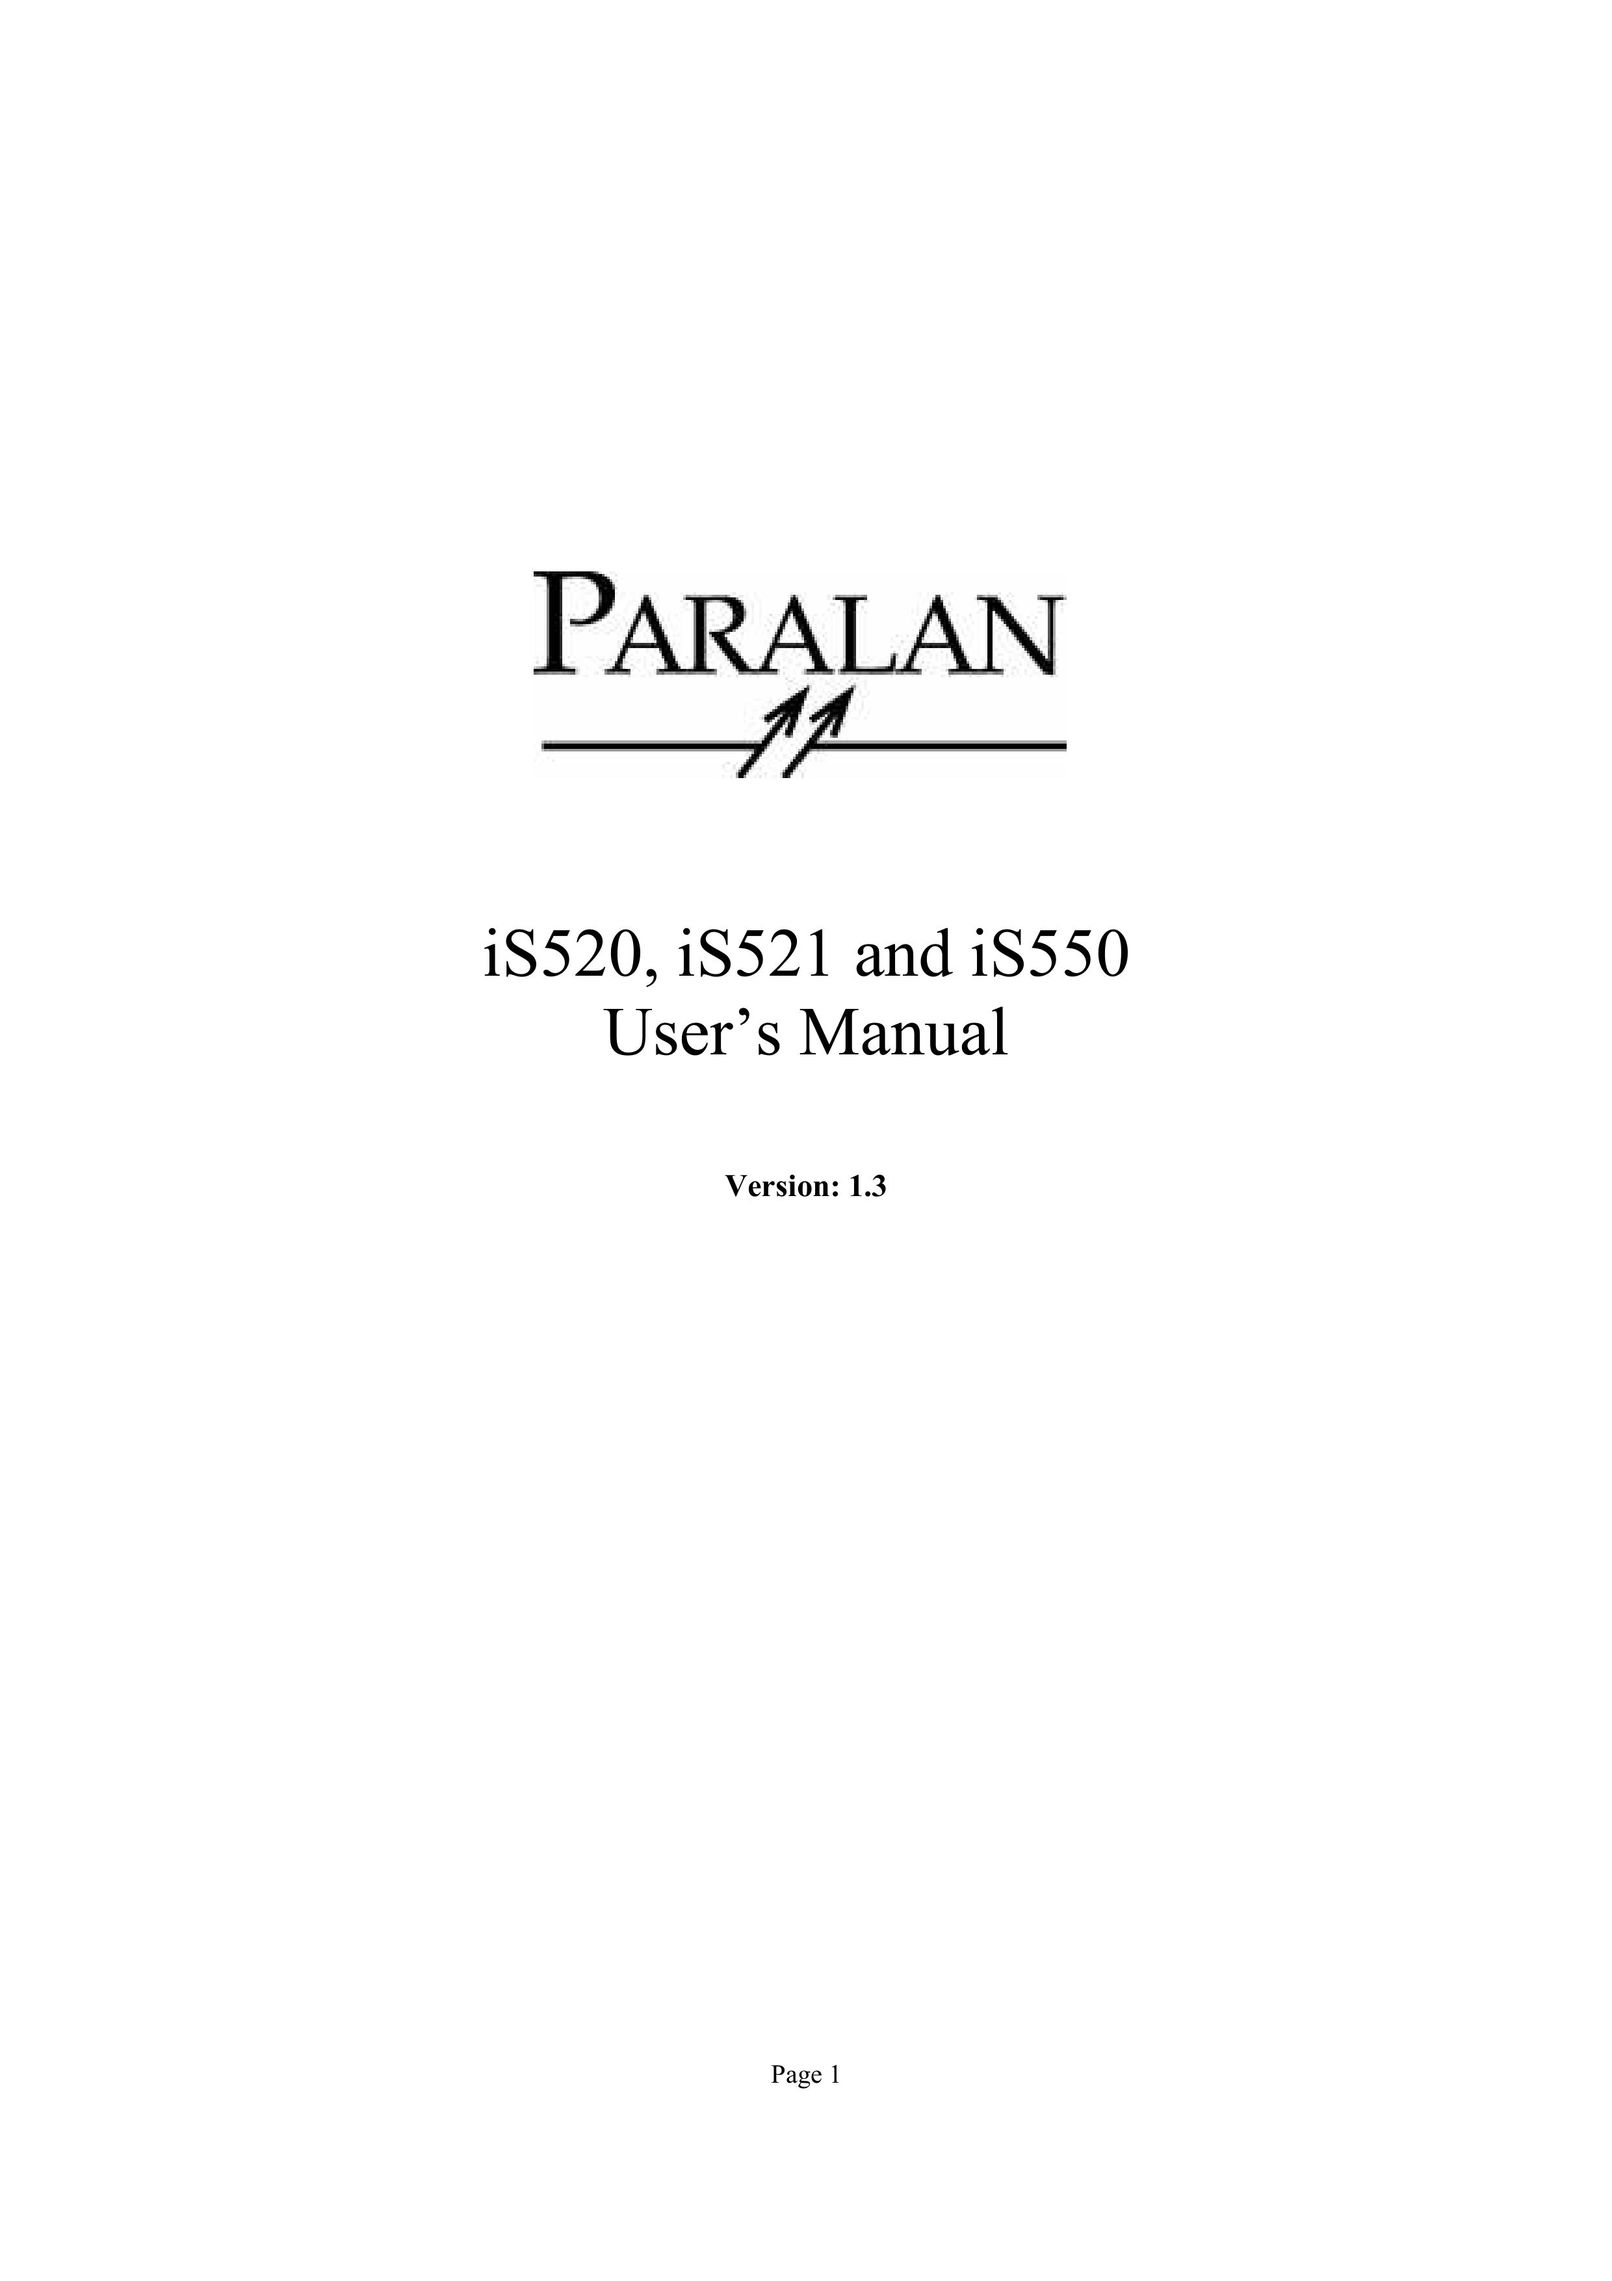 Paralan iS521 Switch User Manual